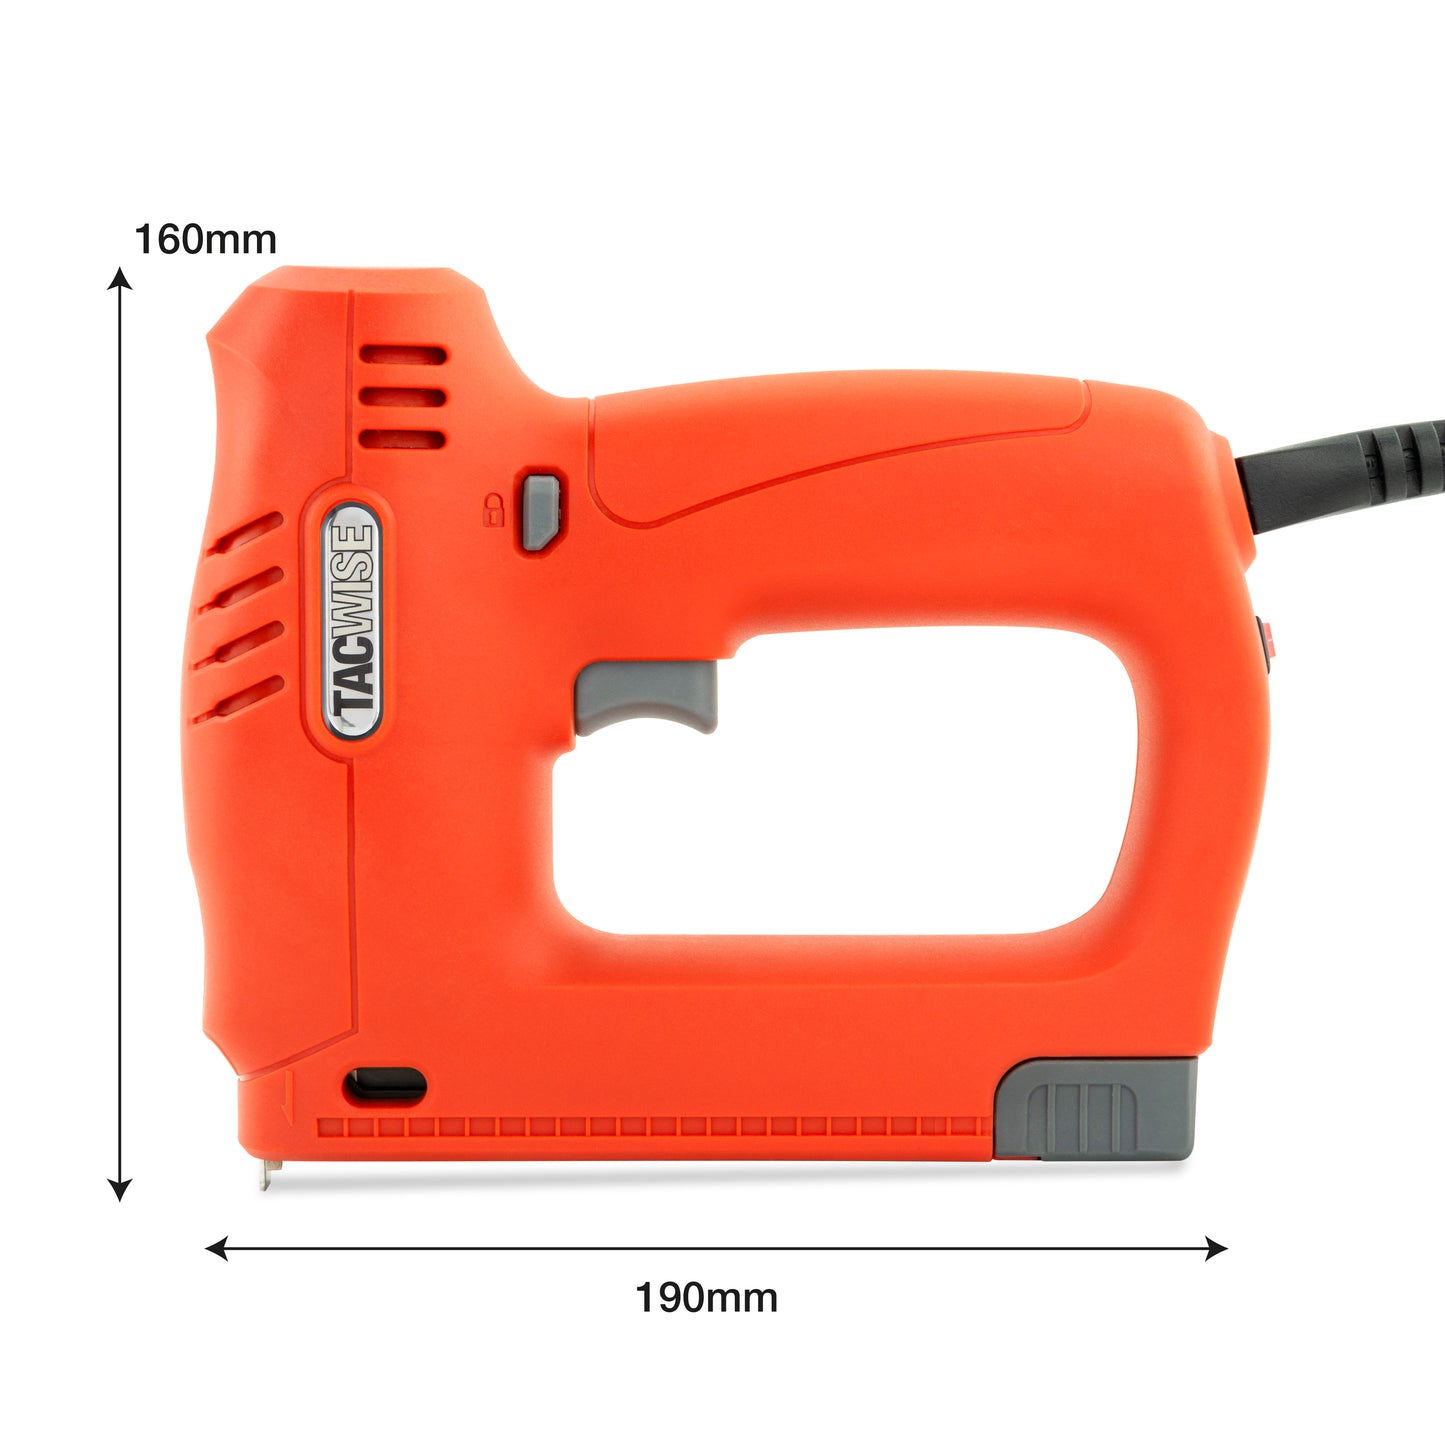 Dimensions for the Tacwise Dual Electric 140 Series Upholstery Stapler 18G Brad Nailer 140EL